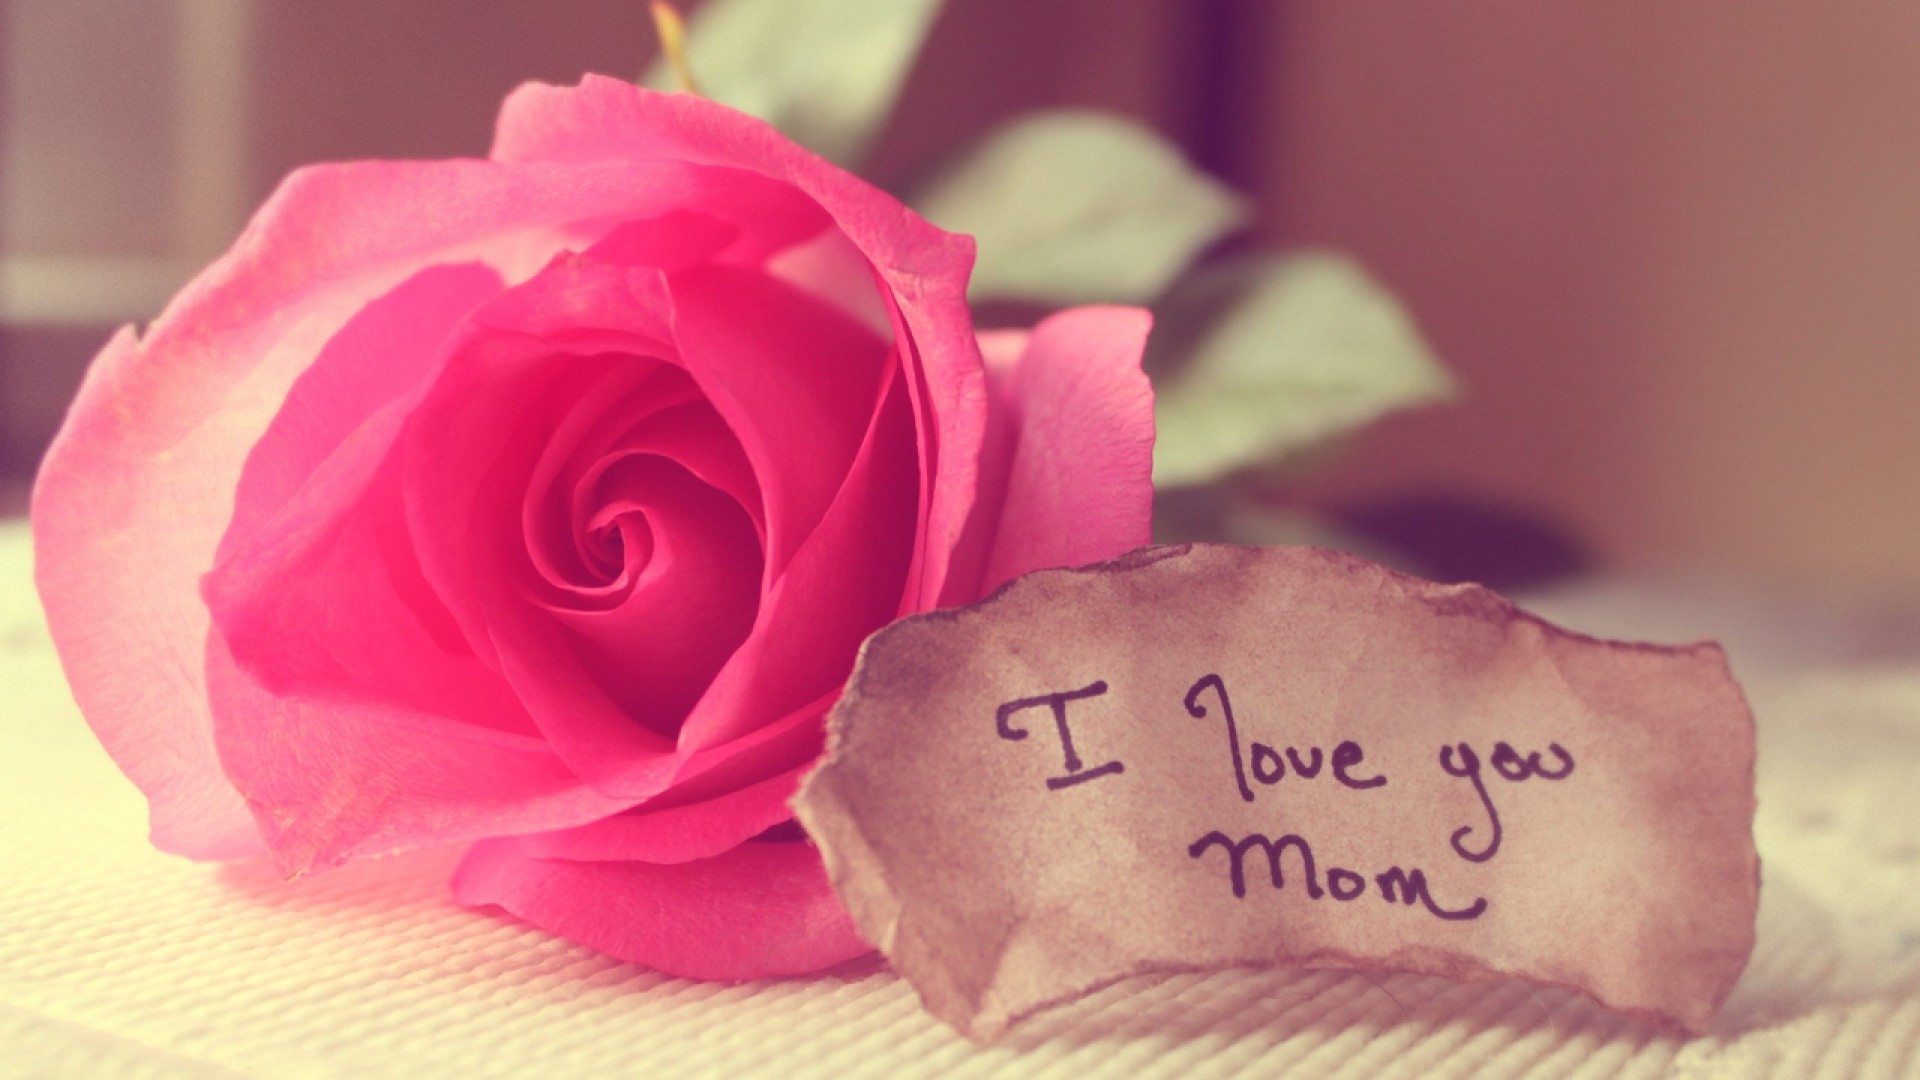 I Love You Mom HD Wallpaper Download Of Mother Love